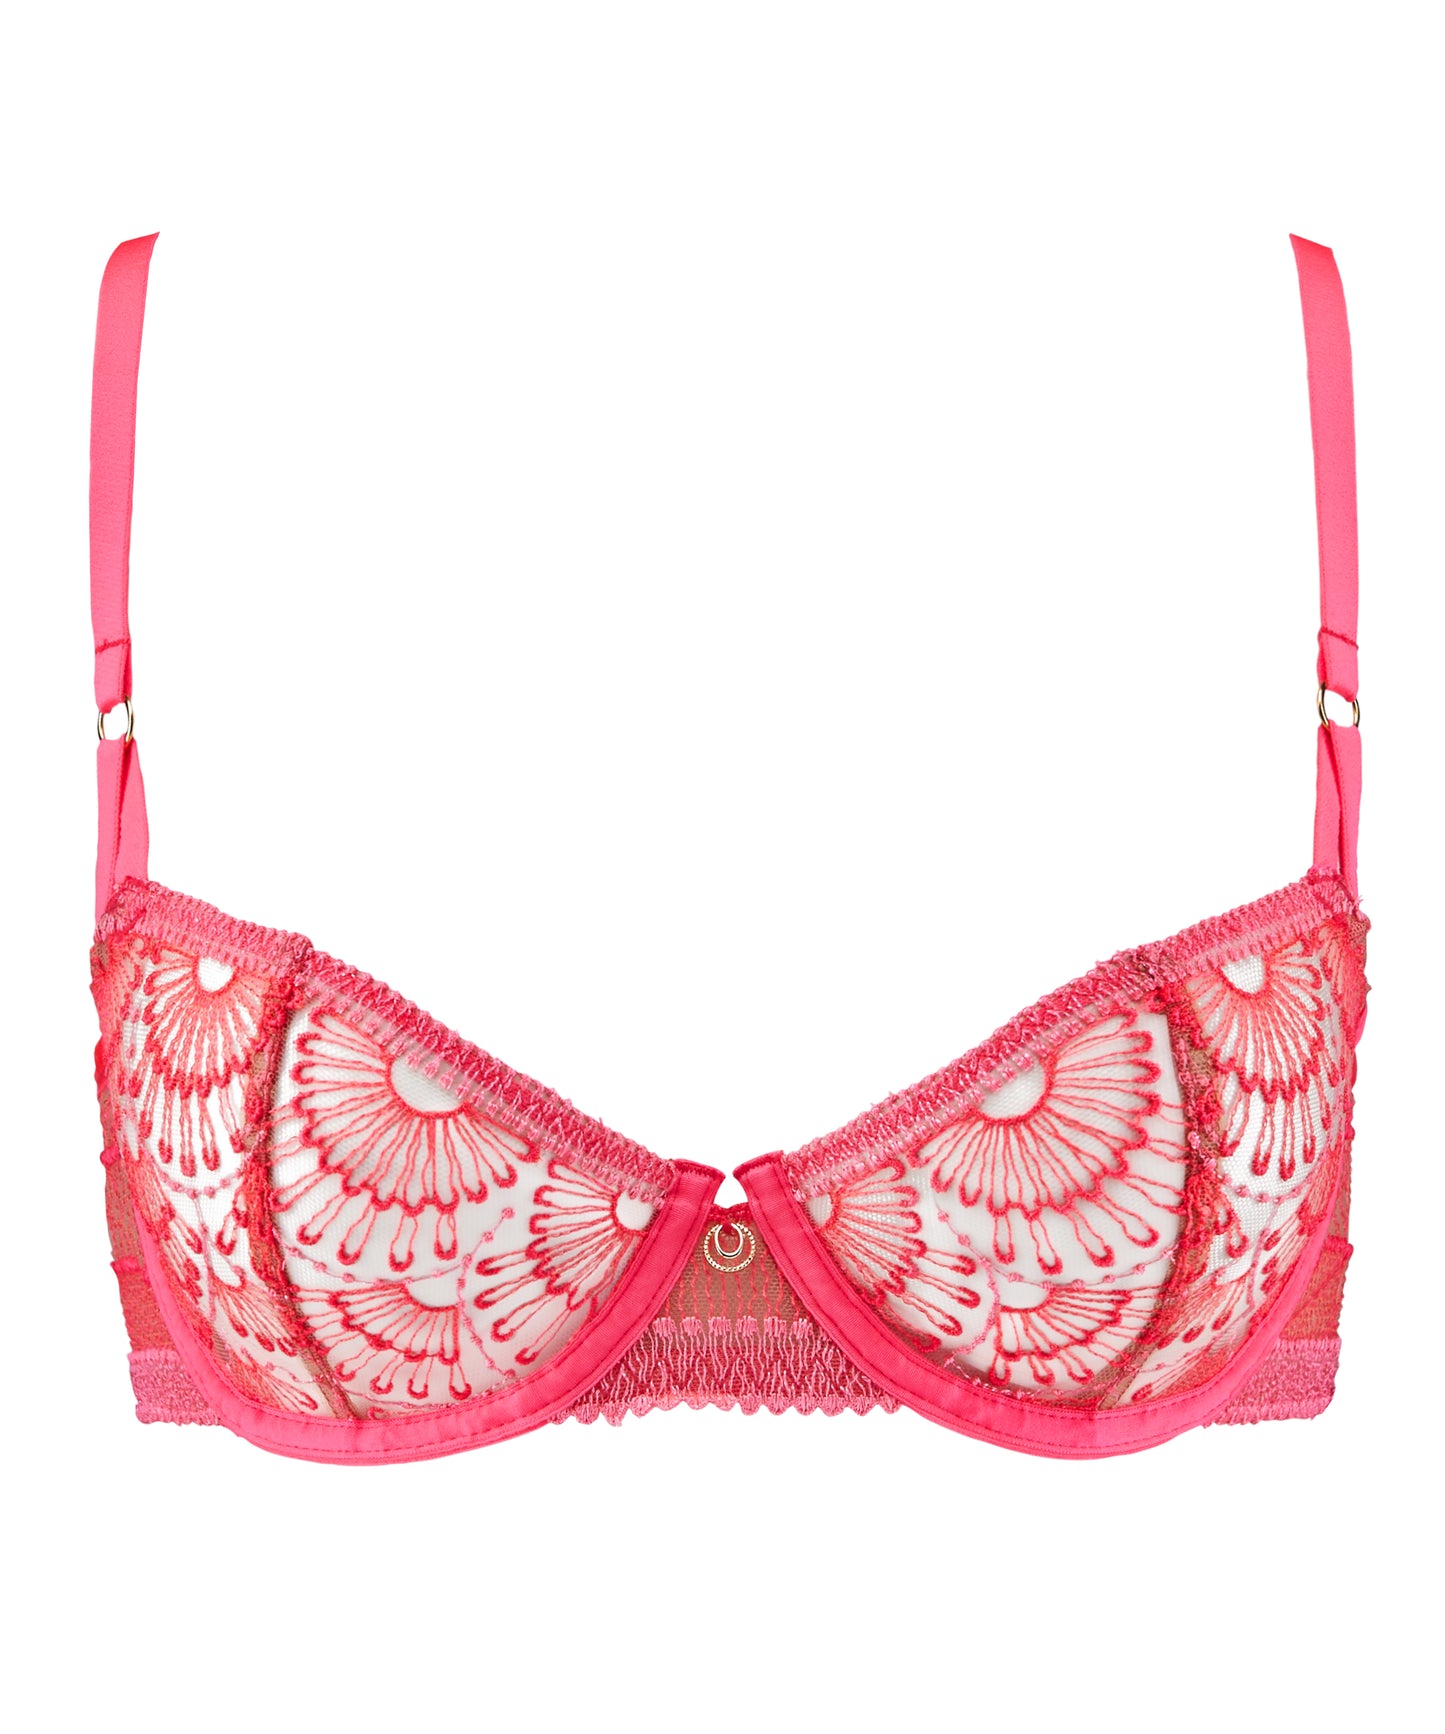 Pure Vibration Half Cup  Bra in Pink Flash By Aubade - 30-40 C-G